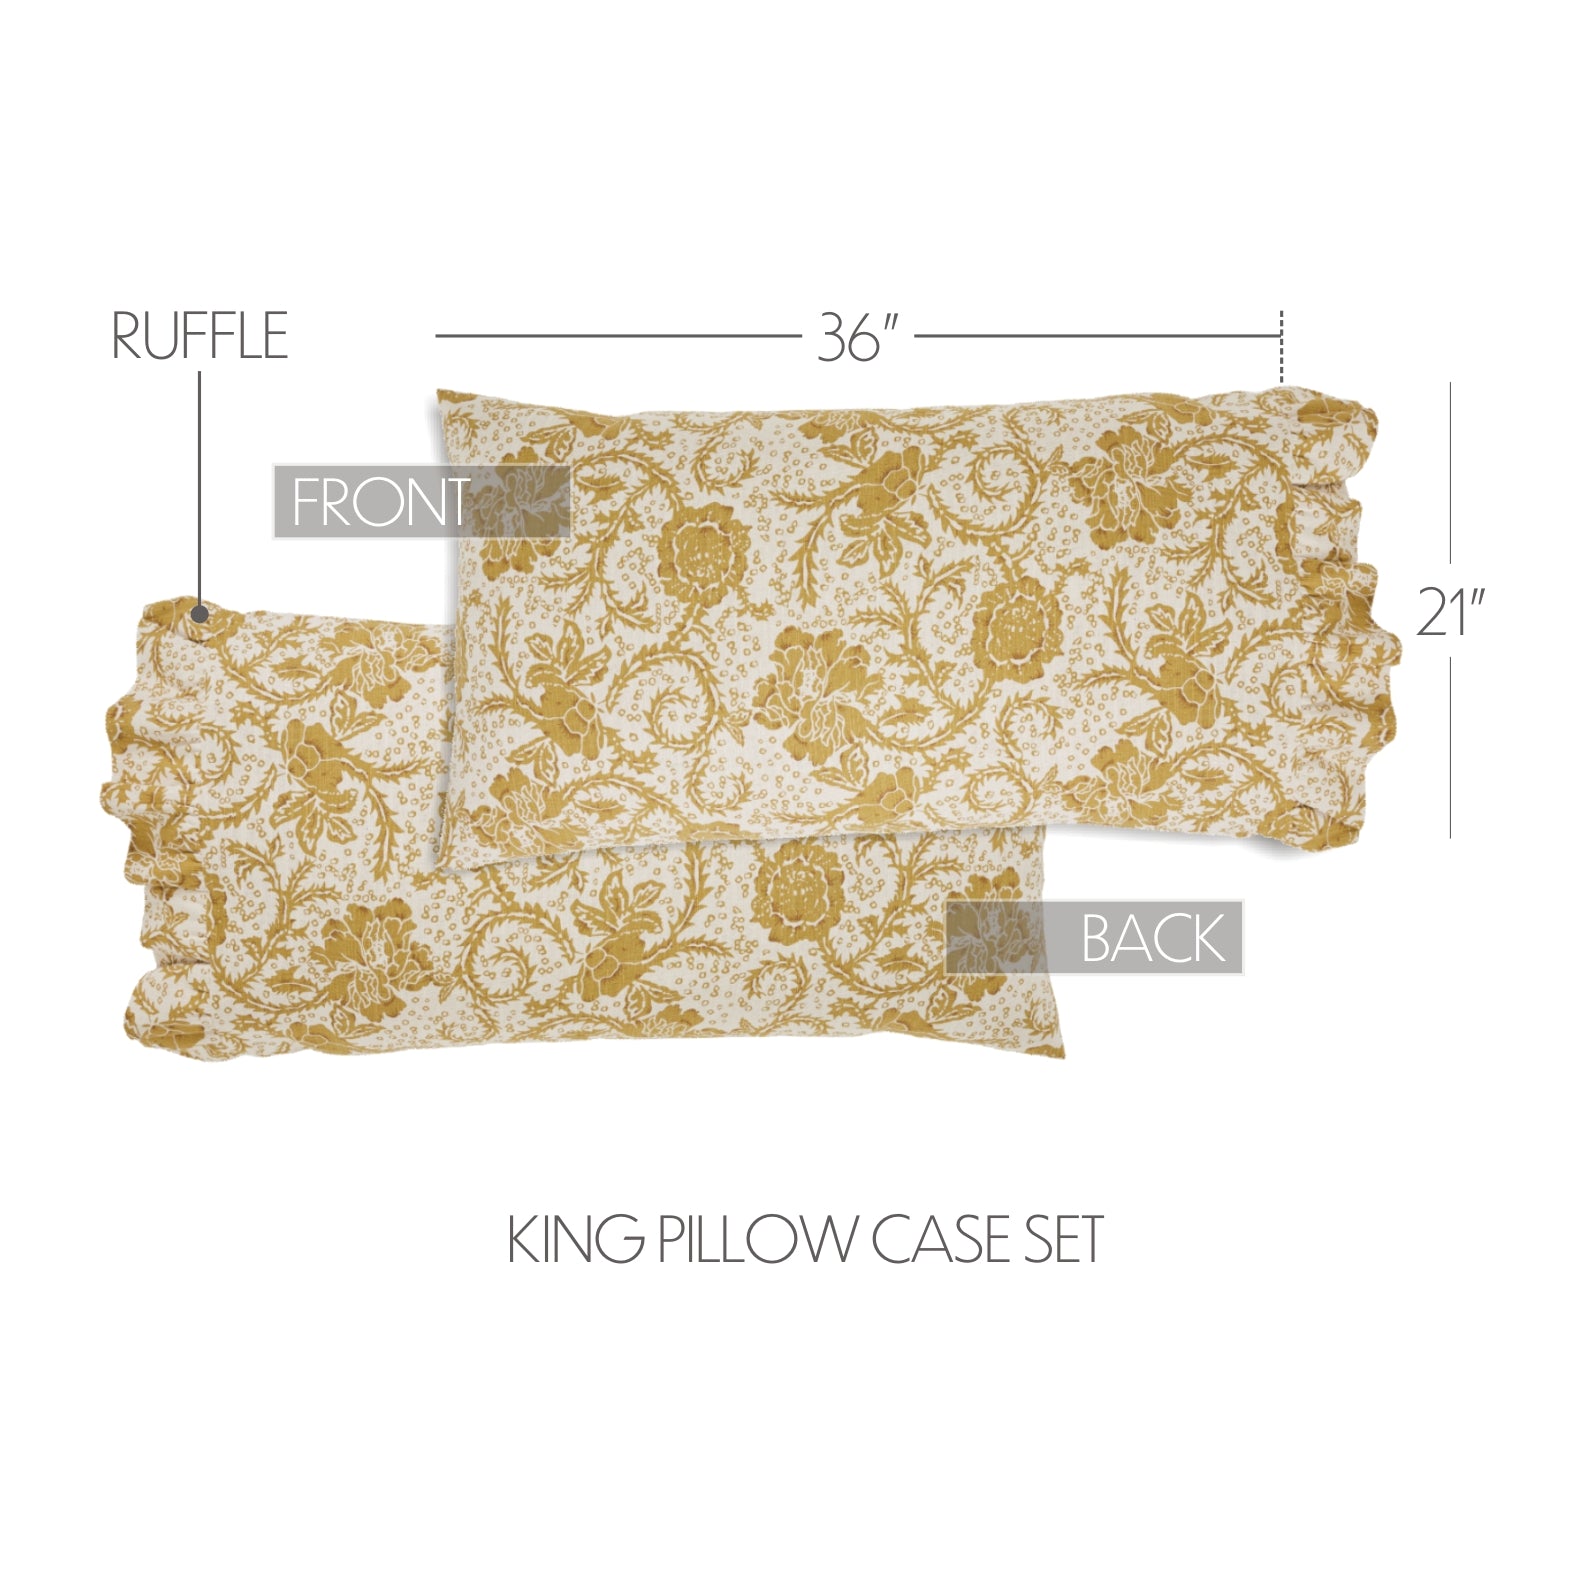 81195-Dorset-Gold-Floral-Ruffled-King-Pillow-Case-Set-of-2-21x36-4-image-1